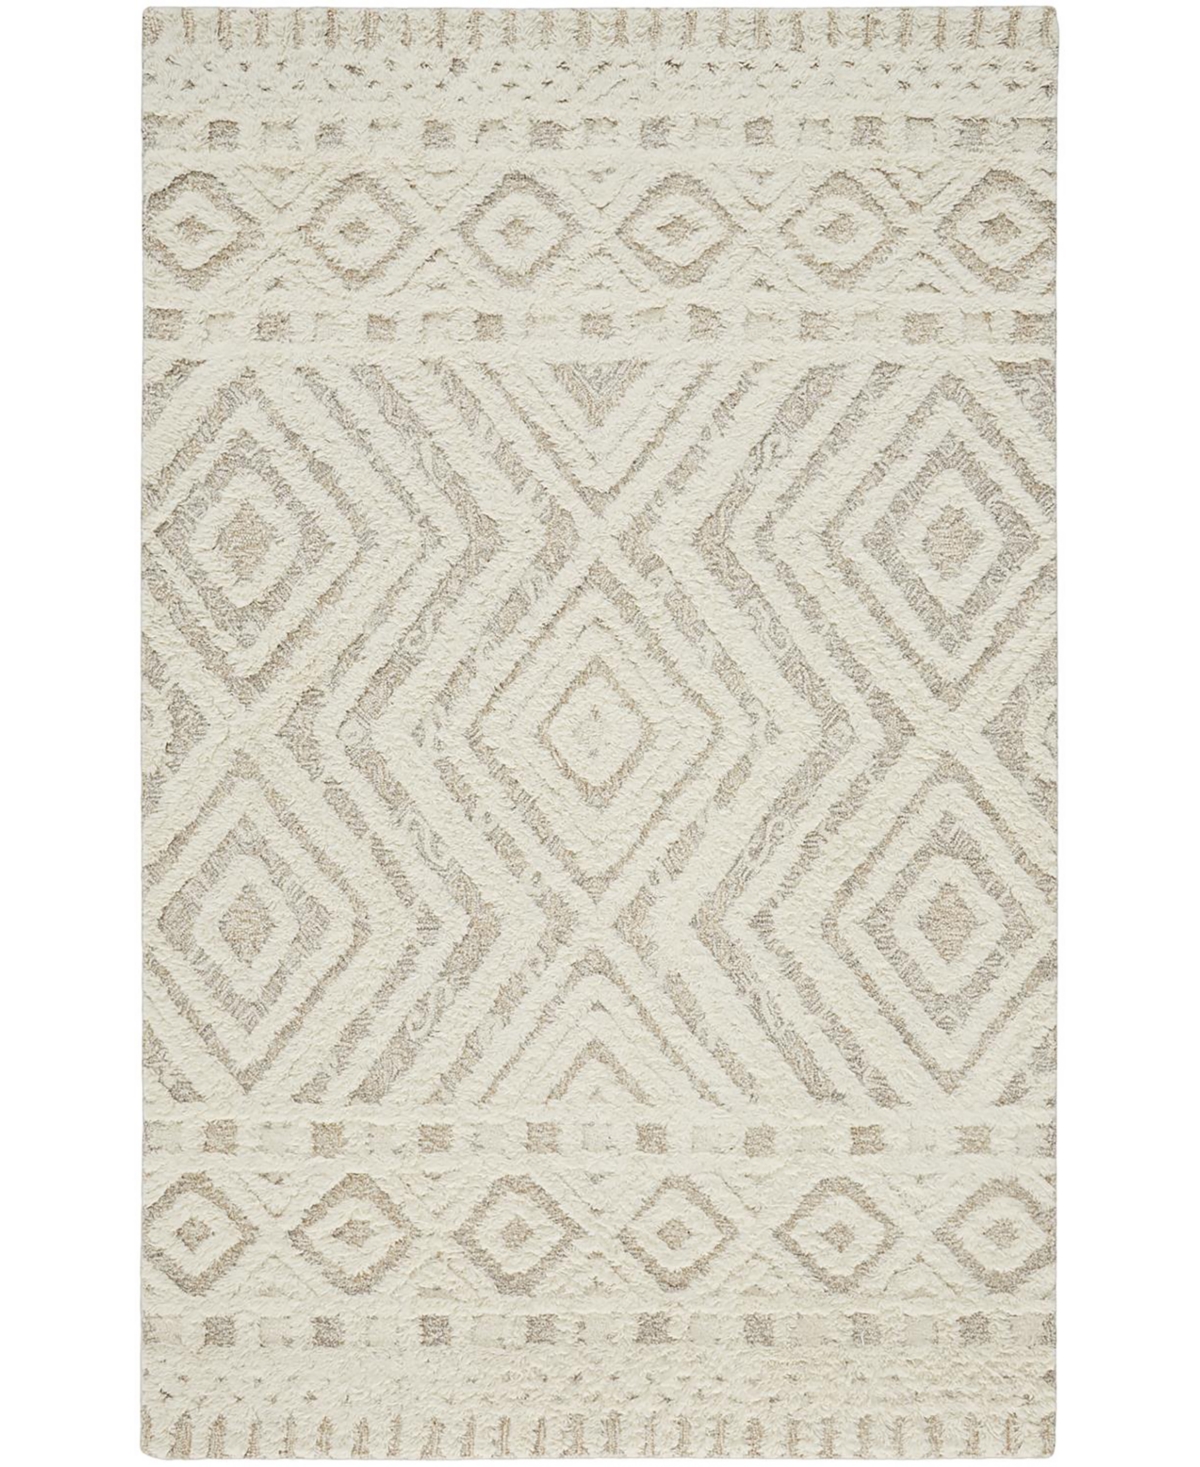 Simply Woven Anica R8010 4' X 6' Area Rug In Ivory,tan